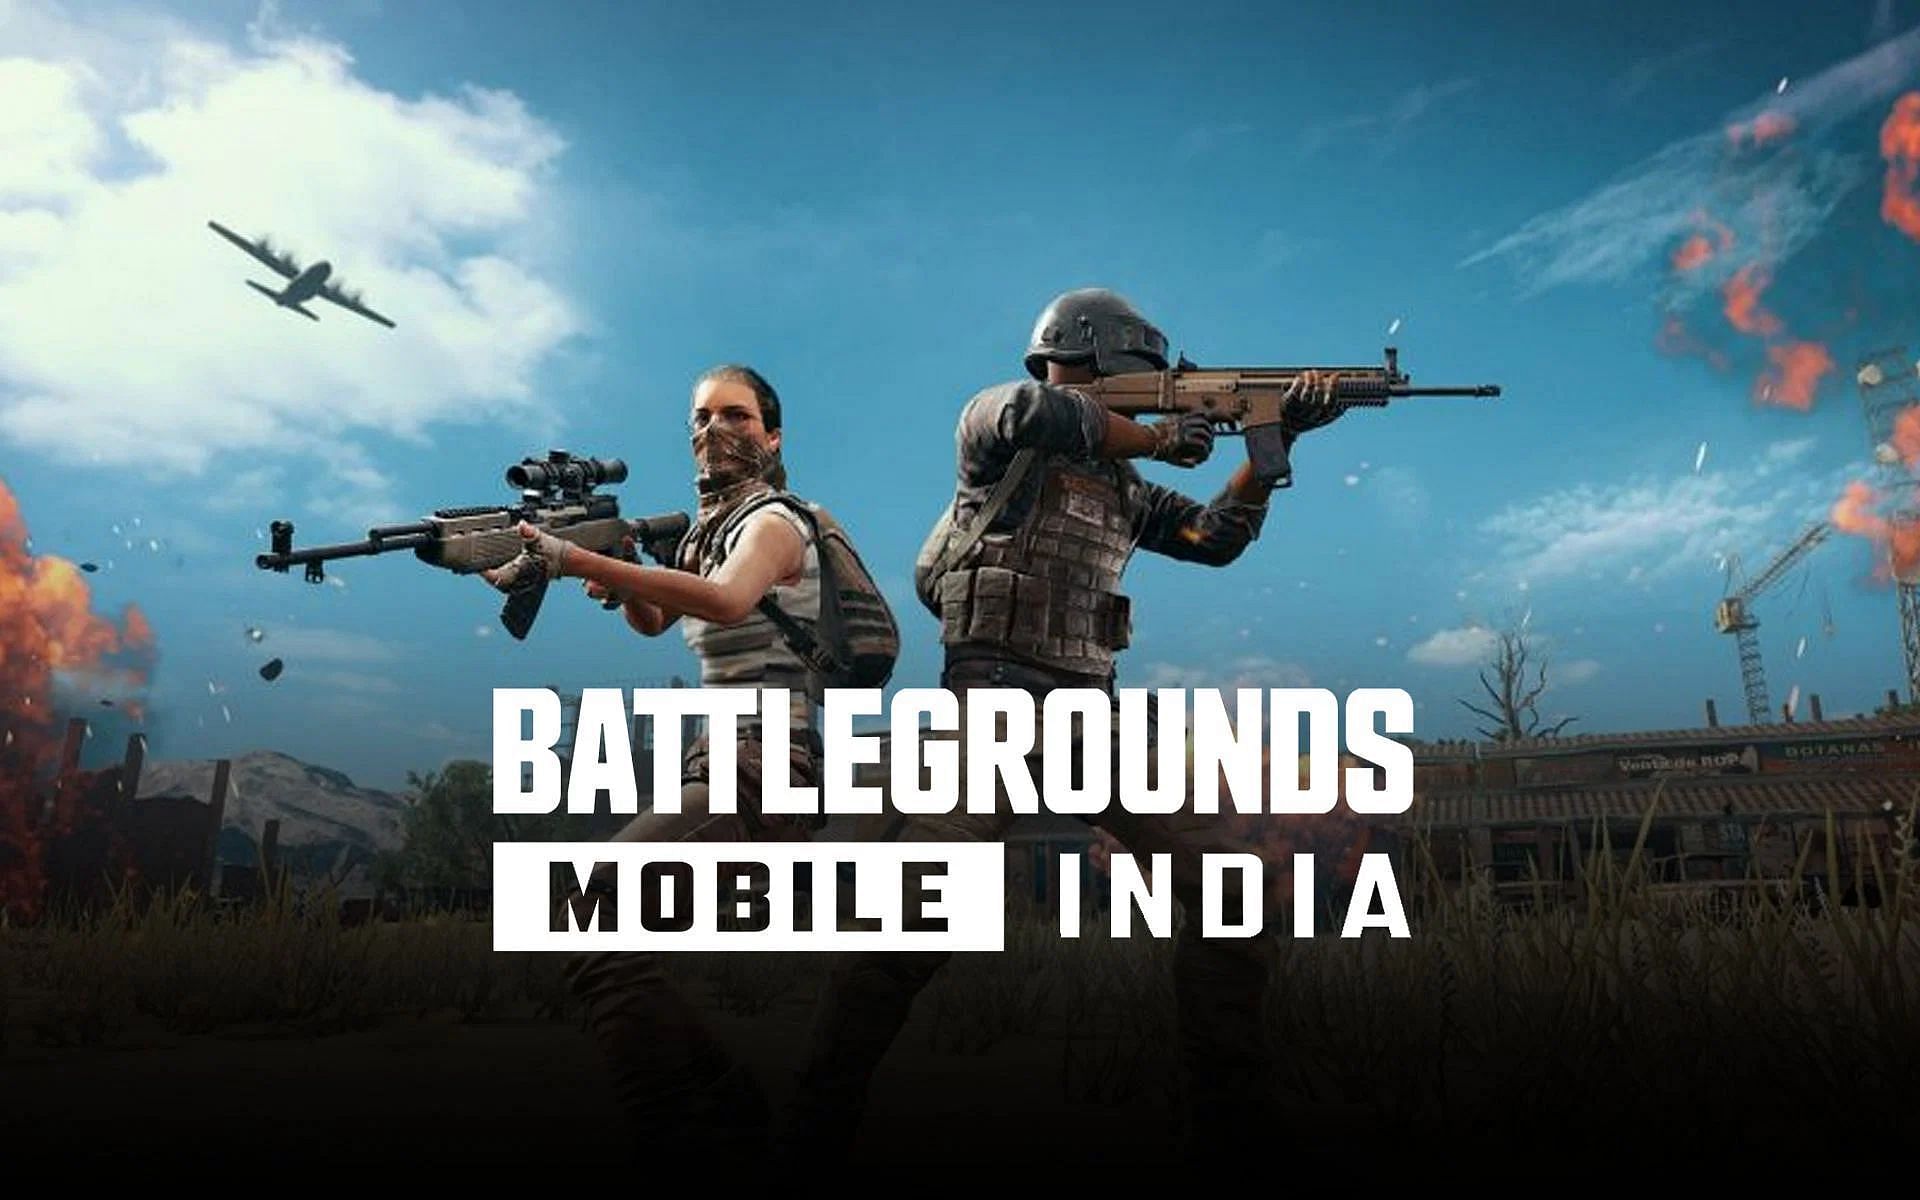 Battlegrounds Mobile India was launched in India in July 2021 (Image via Krafton)